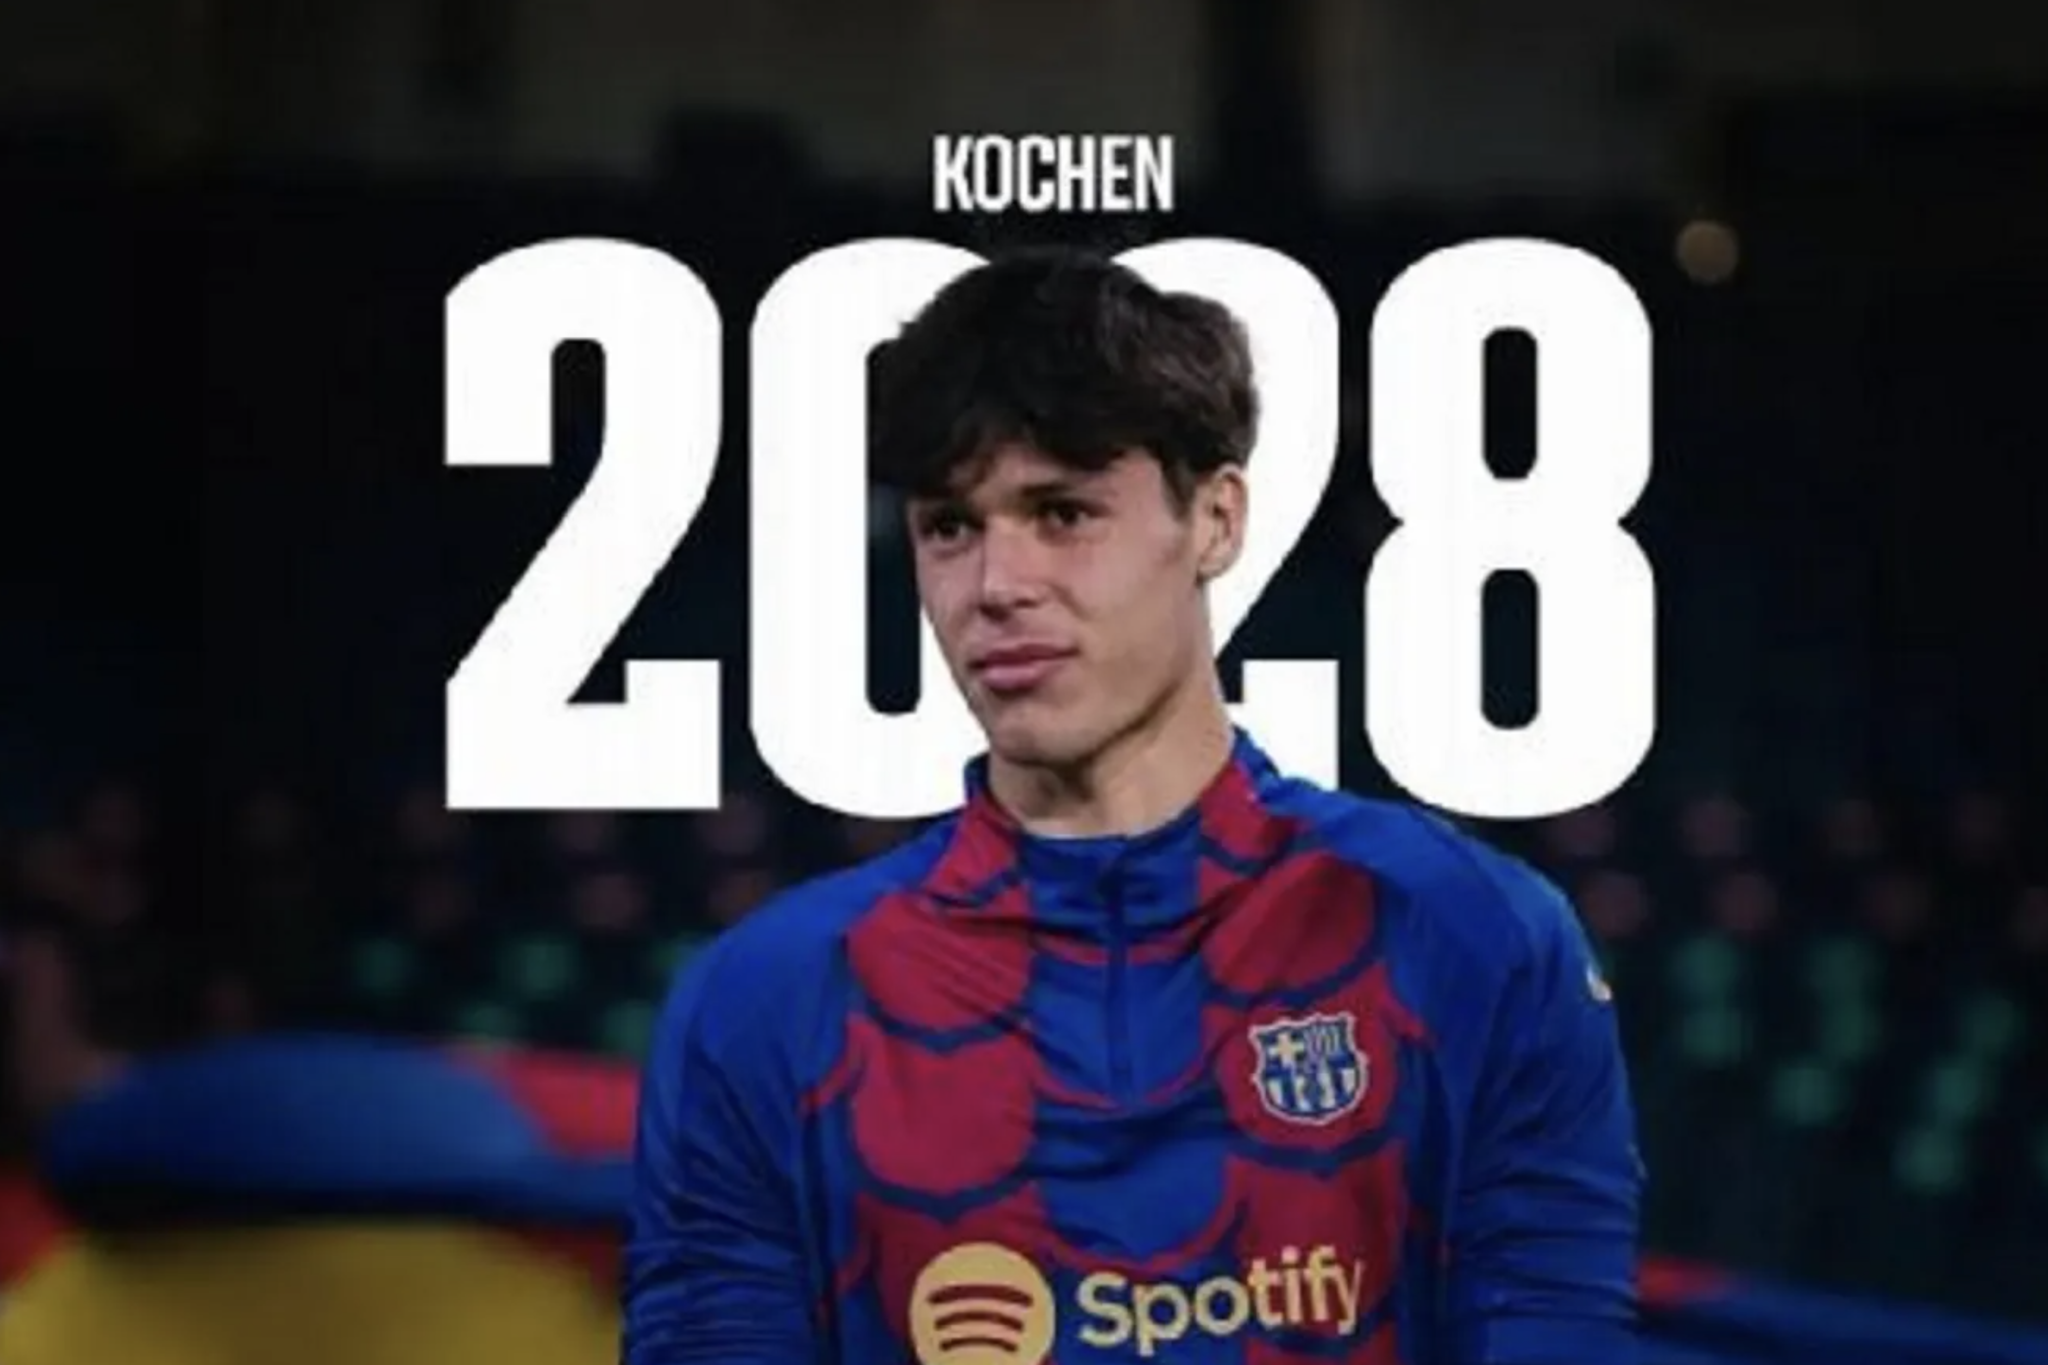 Diego Kochen the USMNT goalkeeper in El Clasico: Is he the heir to Marc-Andre ter Stegen?